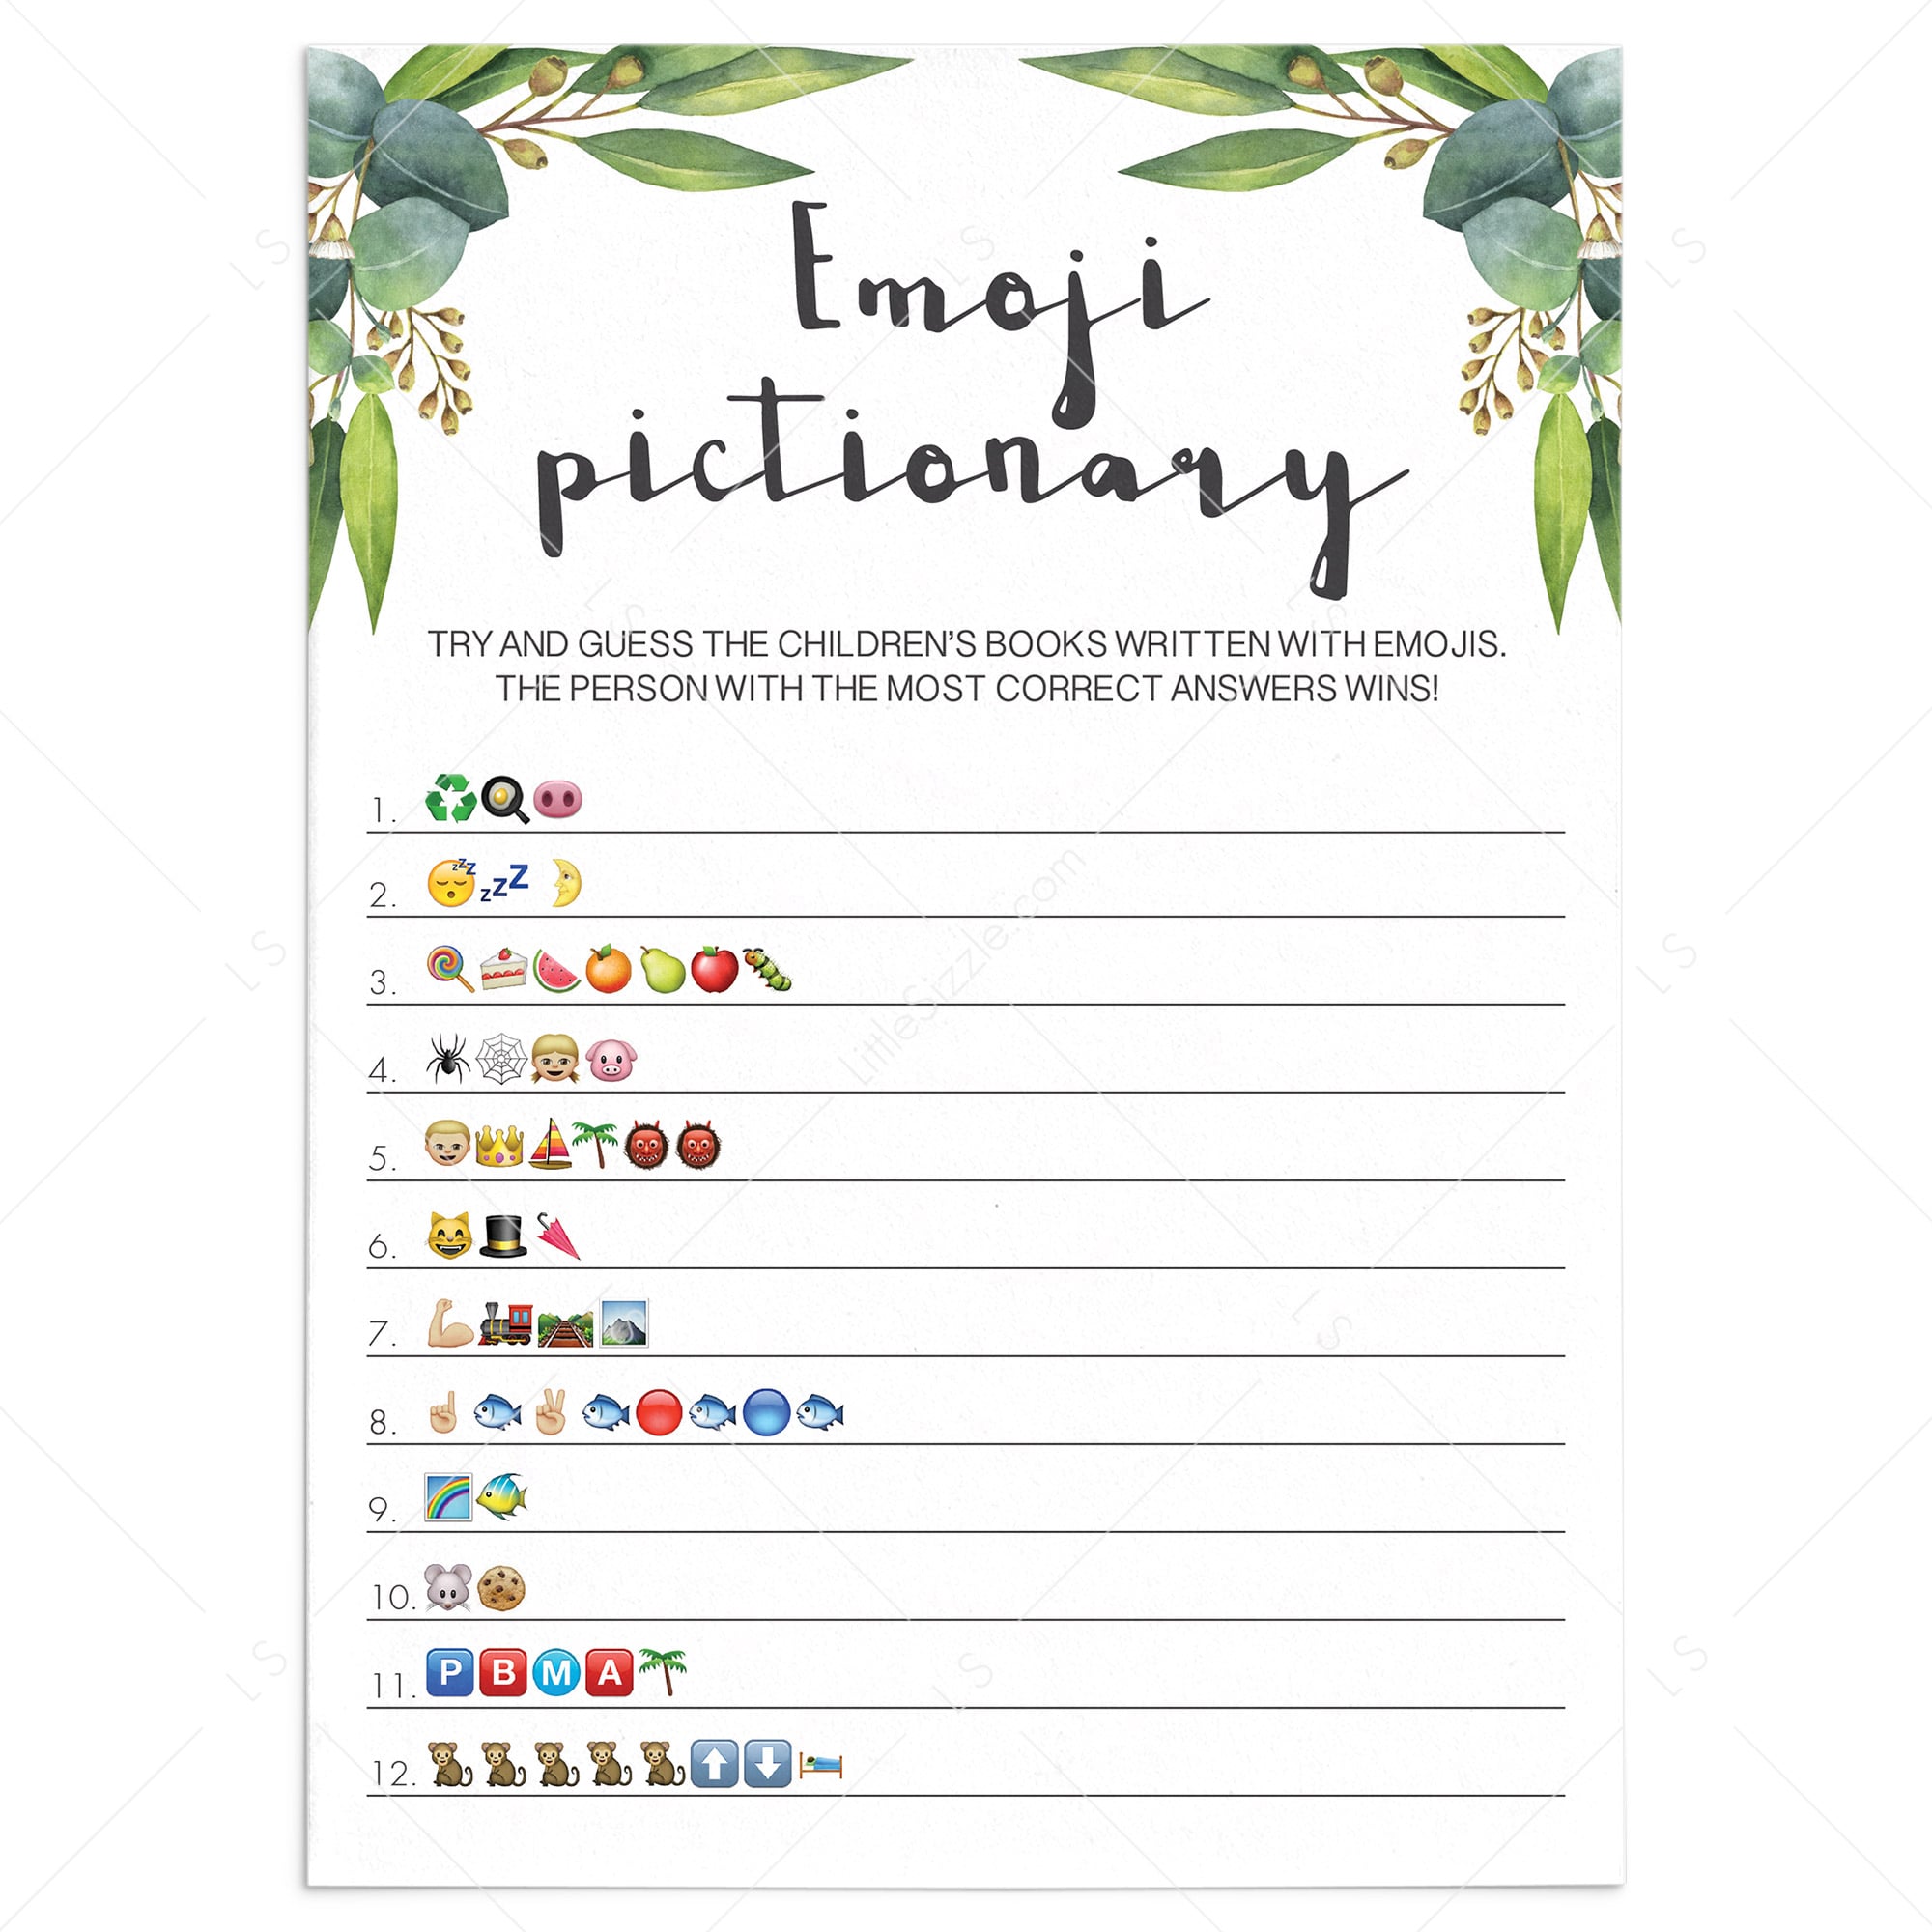 Baby emoji pictionary game with green leaves by LittleSizzle